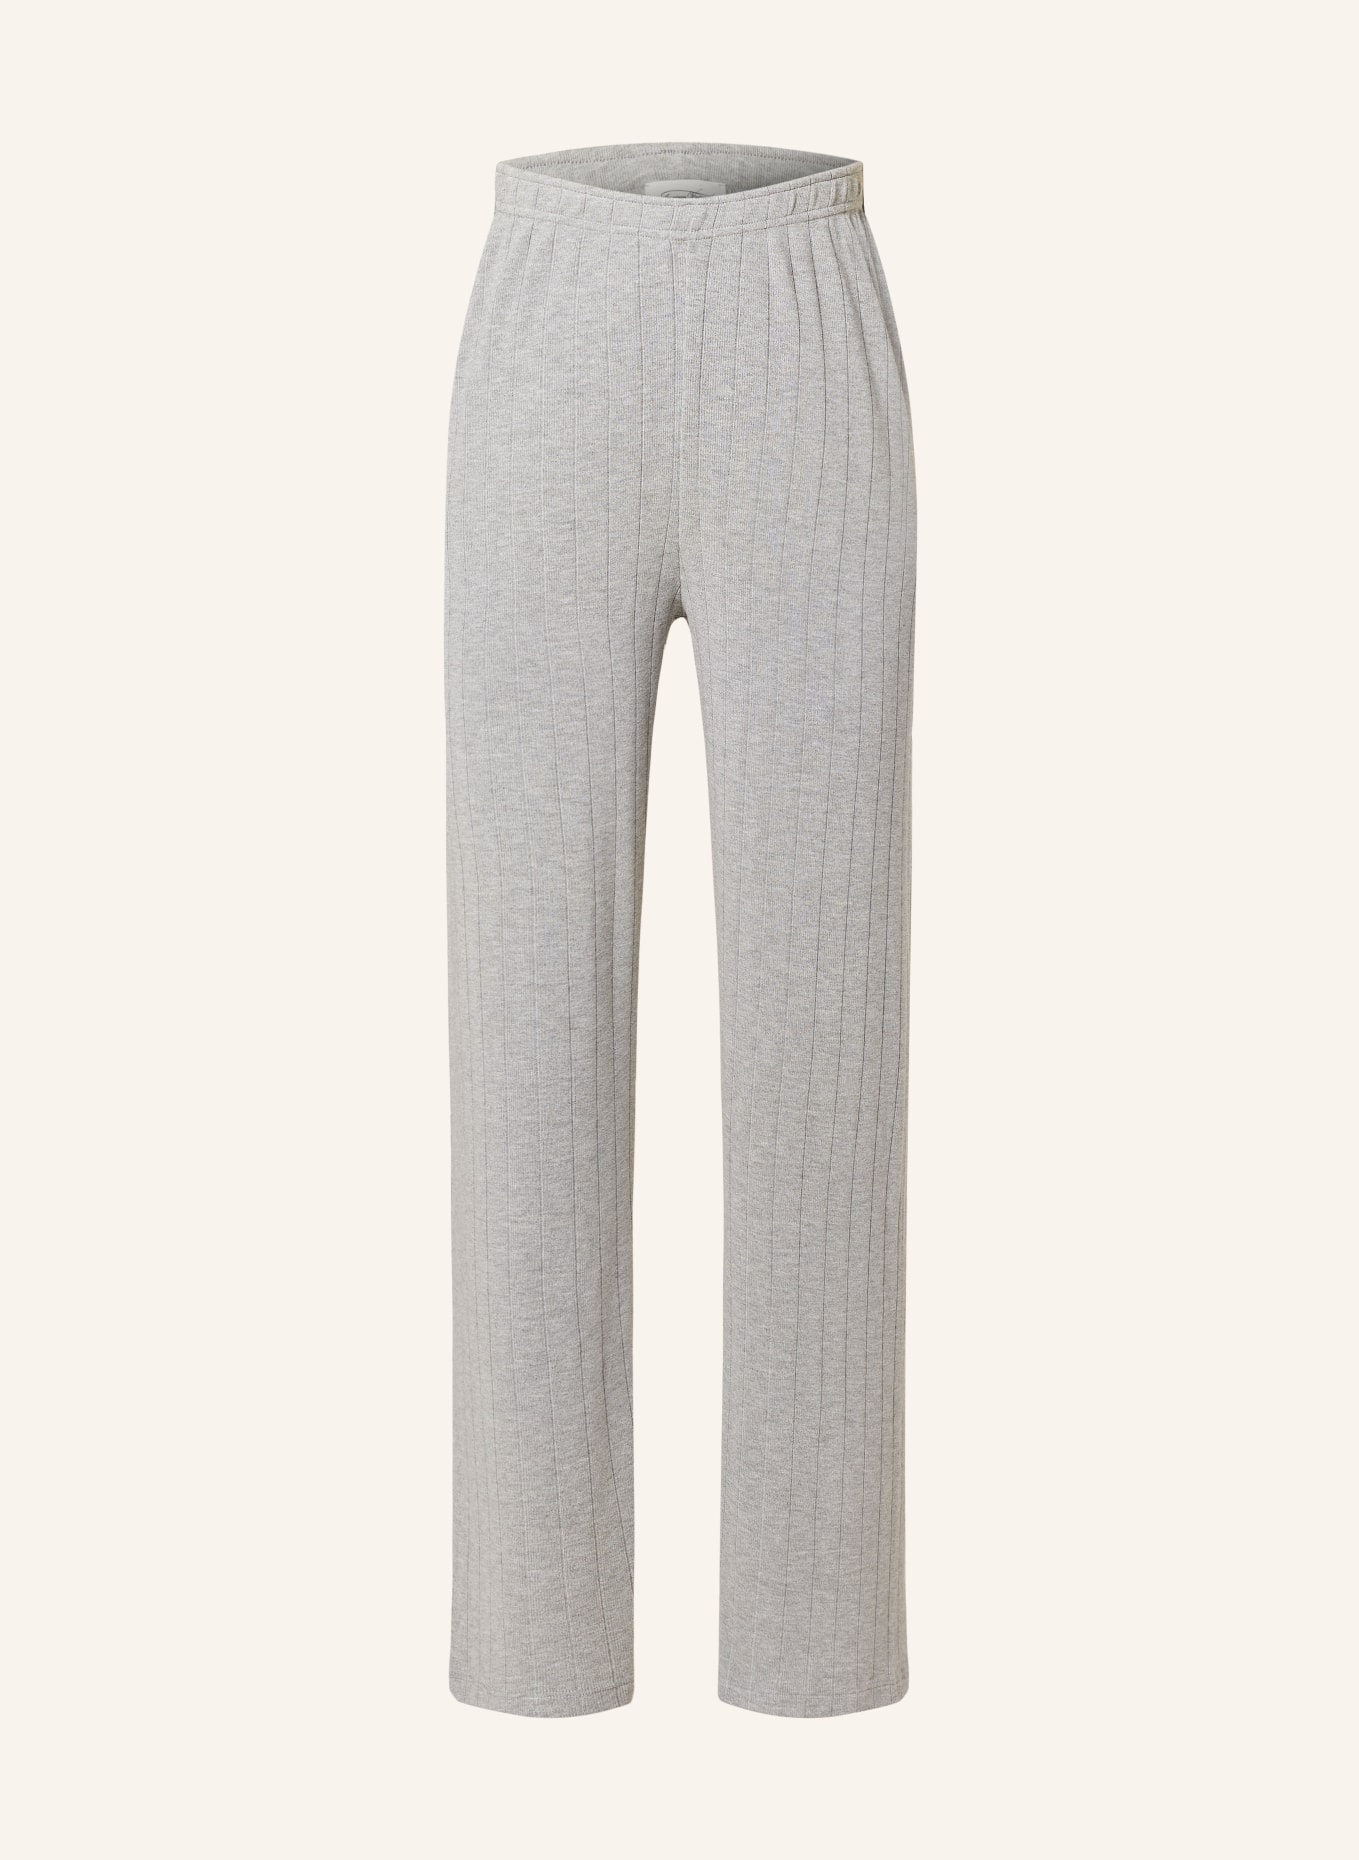 American Vintage Knit trousers ROABIRD, Color: GRAY (Image 1)